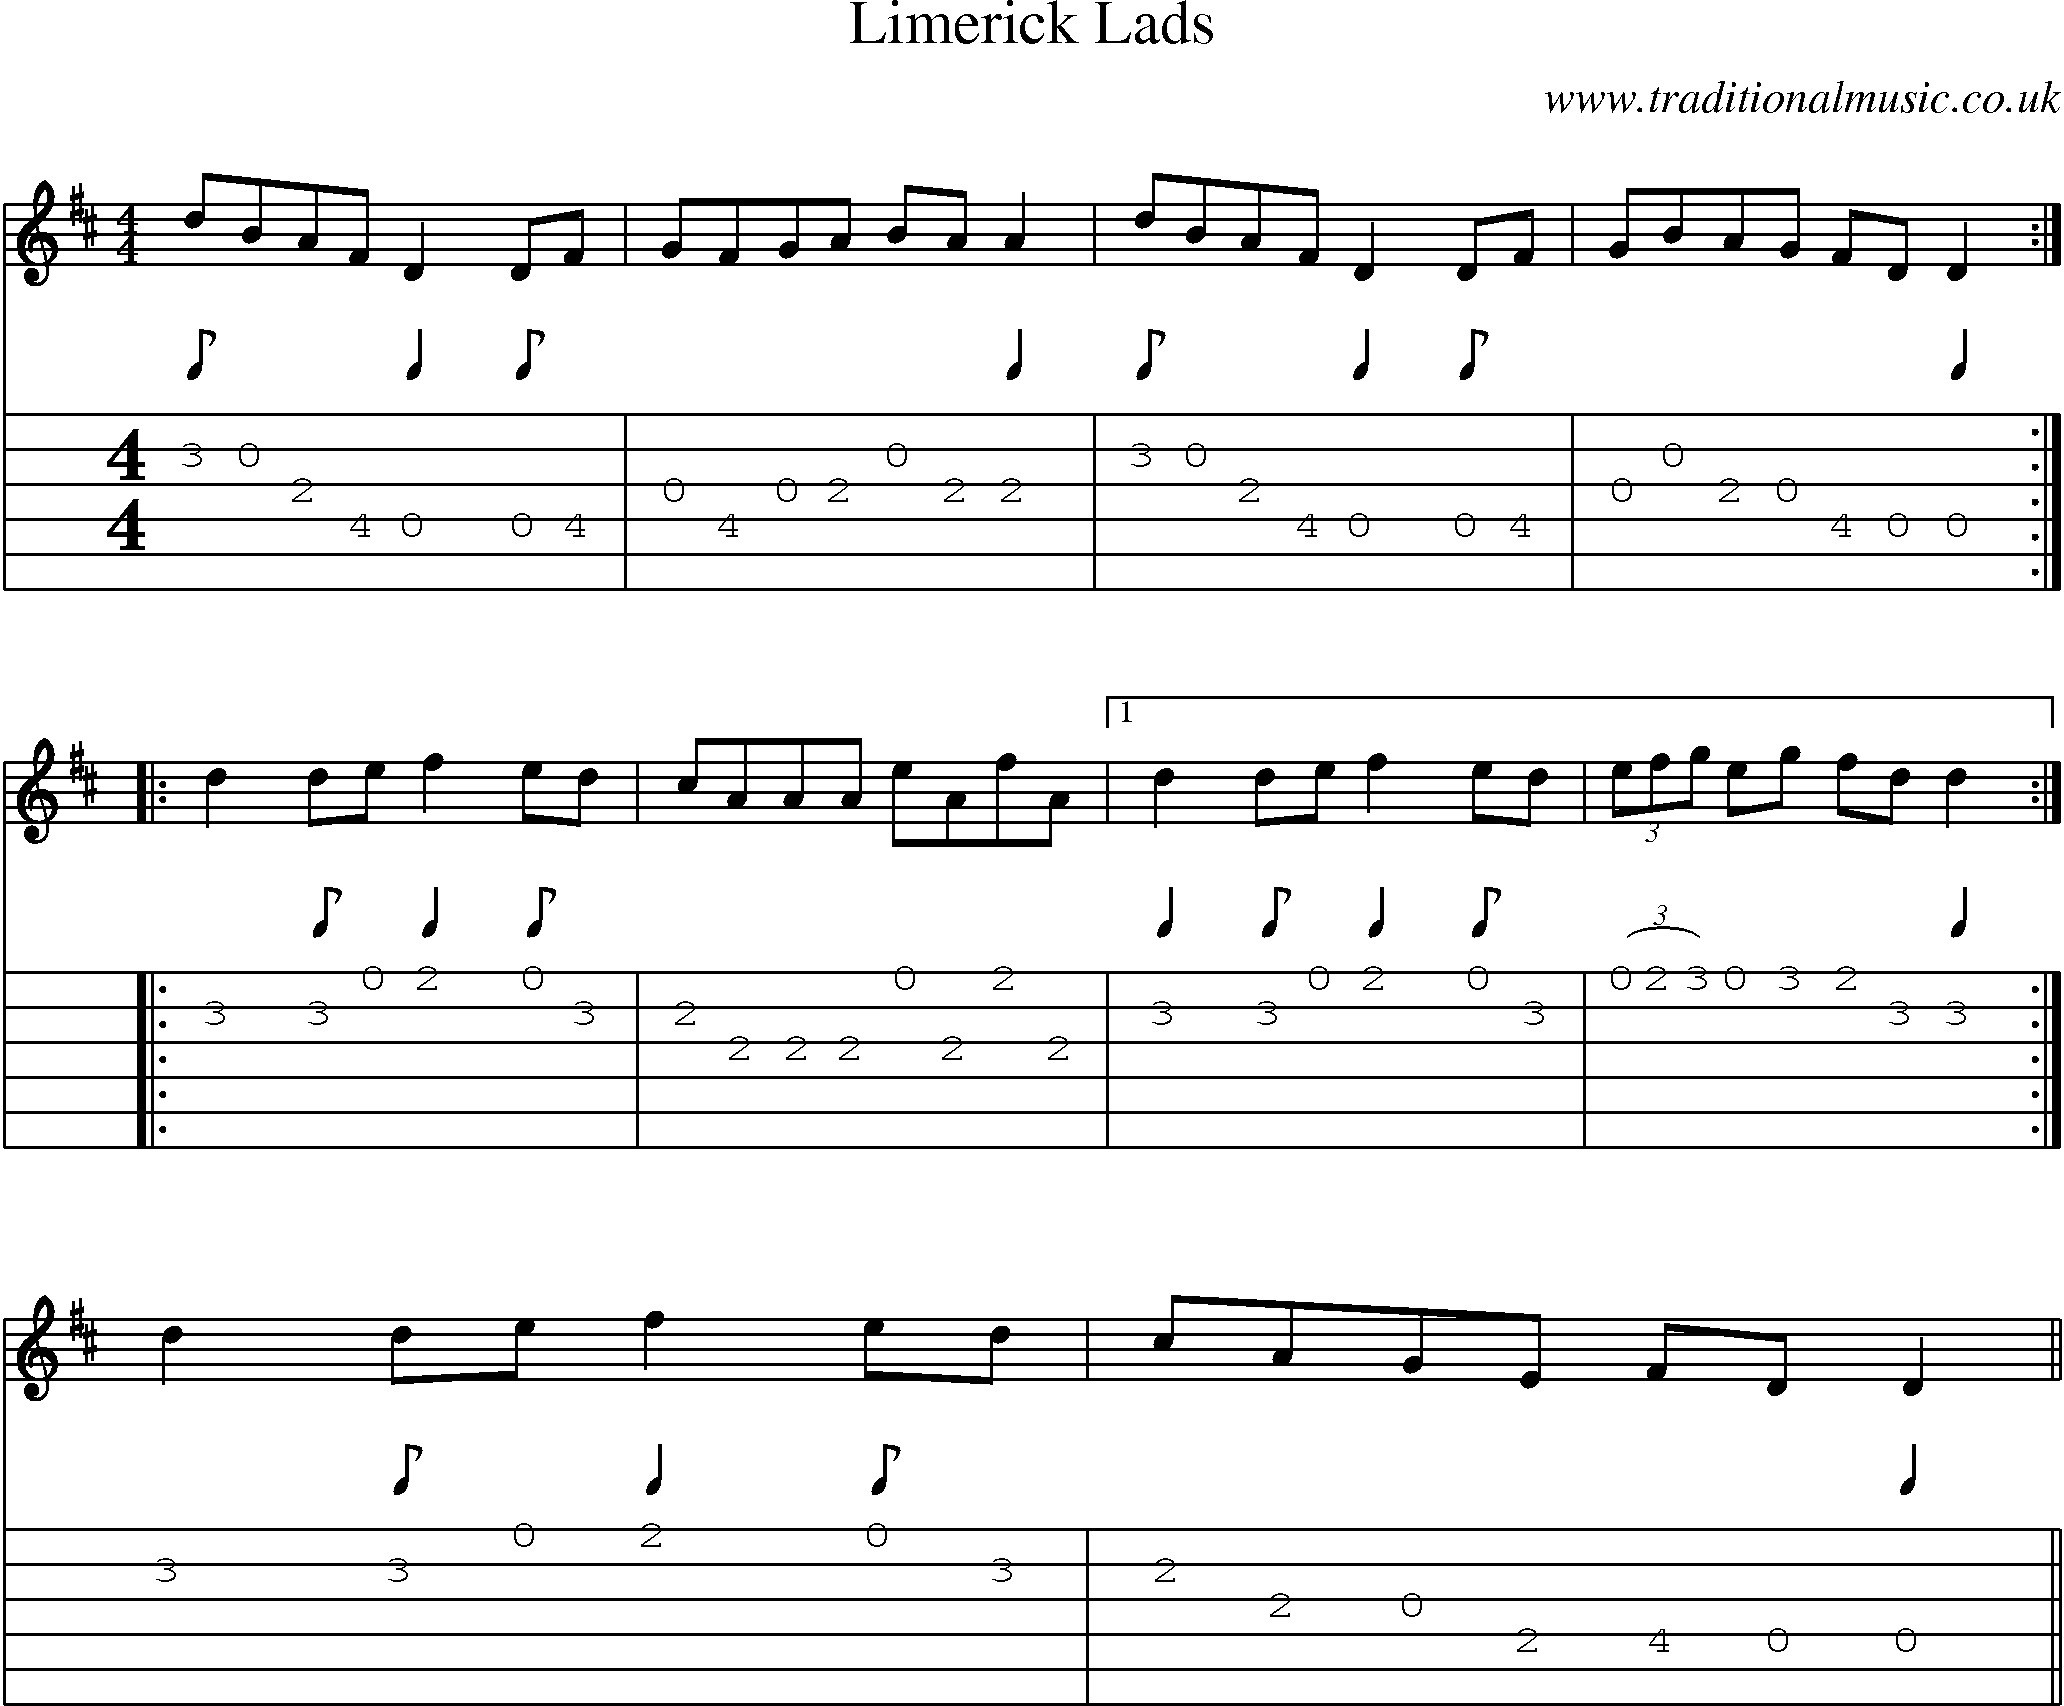 Music Score and Guitar Tabs for Limerick Lads